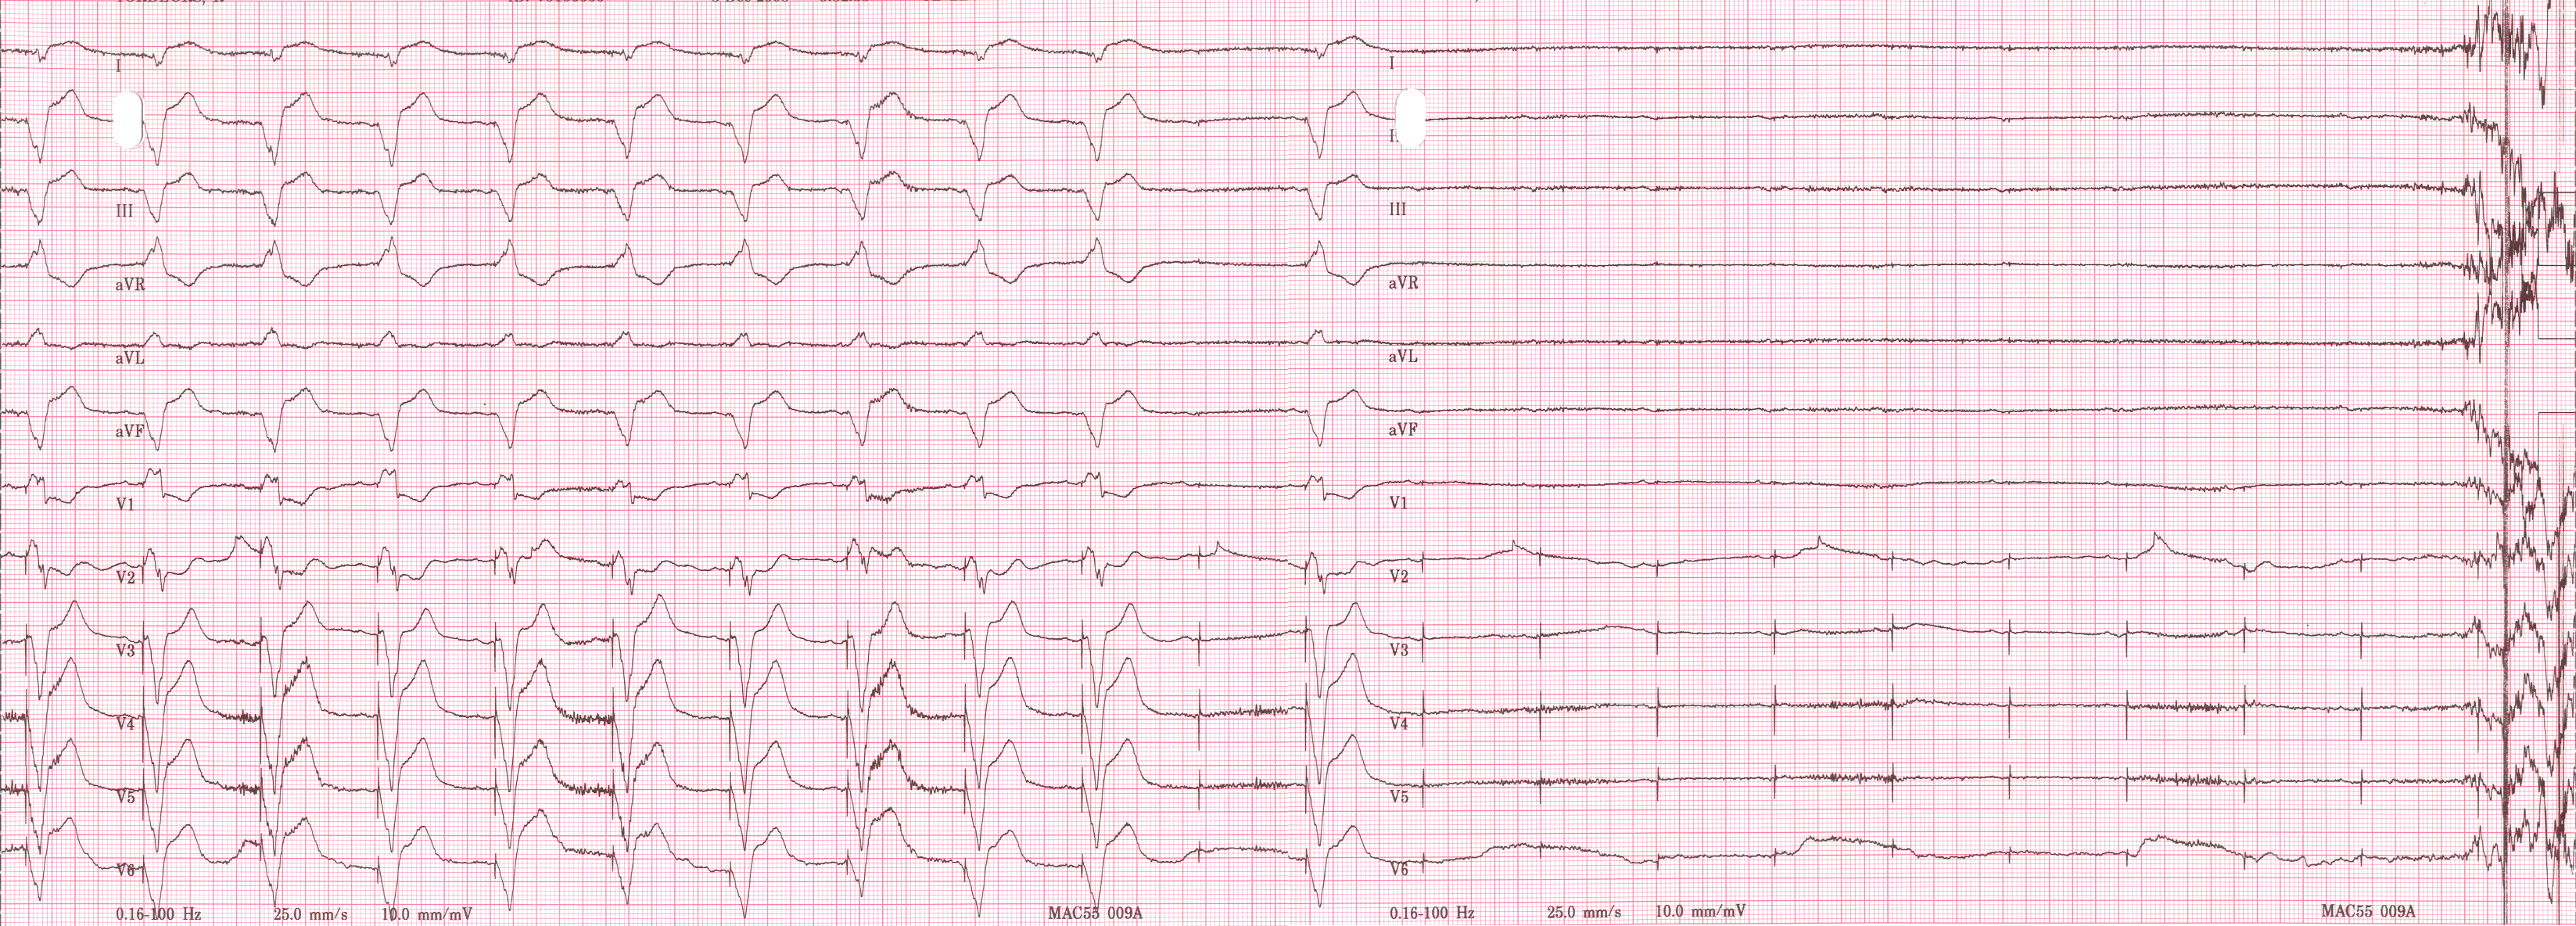 File:Pacemaker dependent asystole.jpg